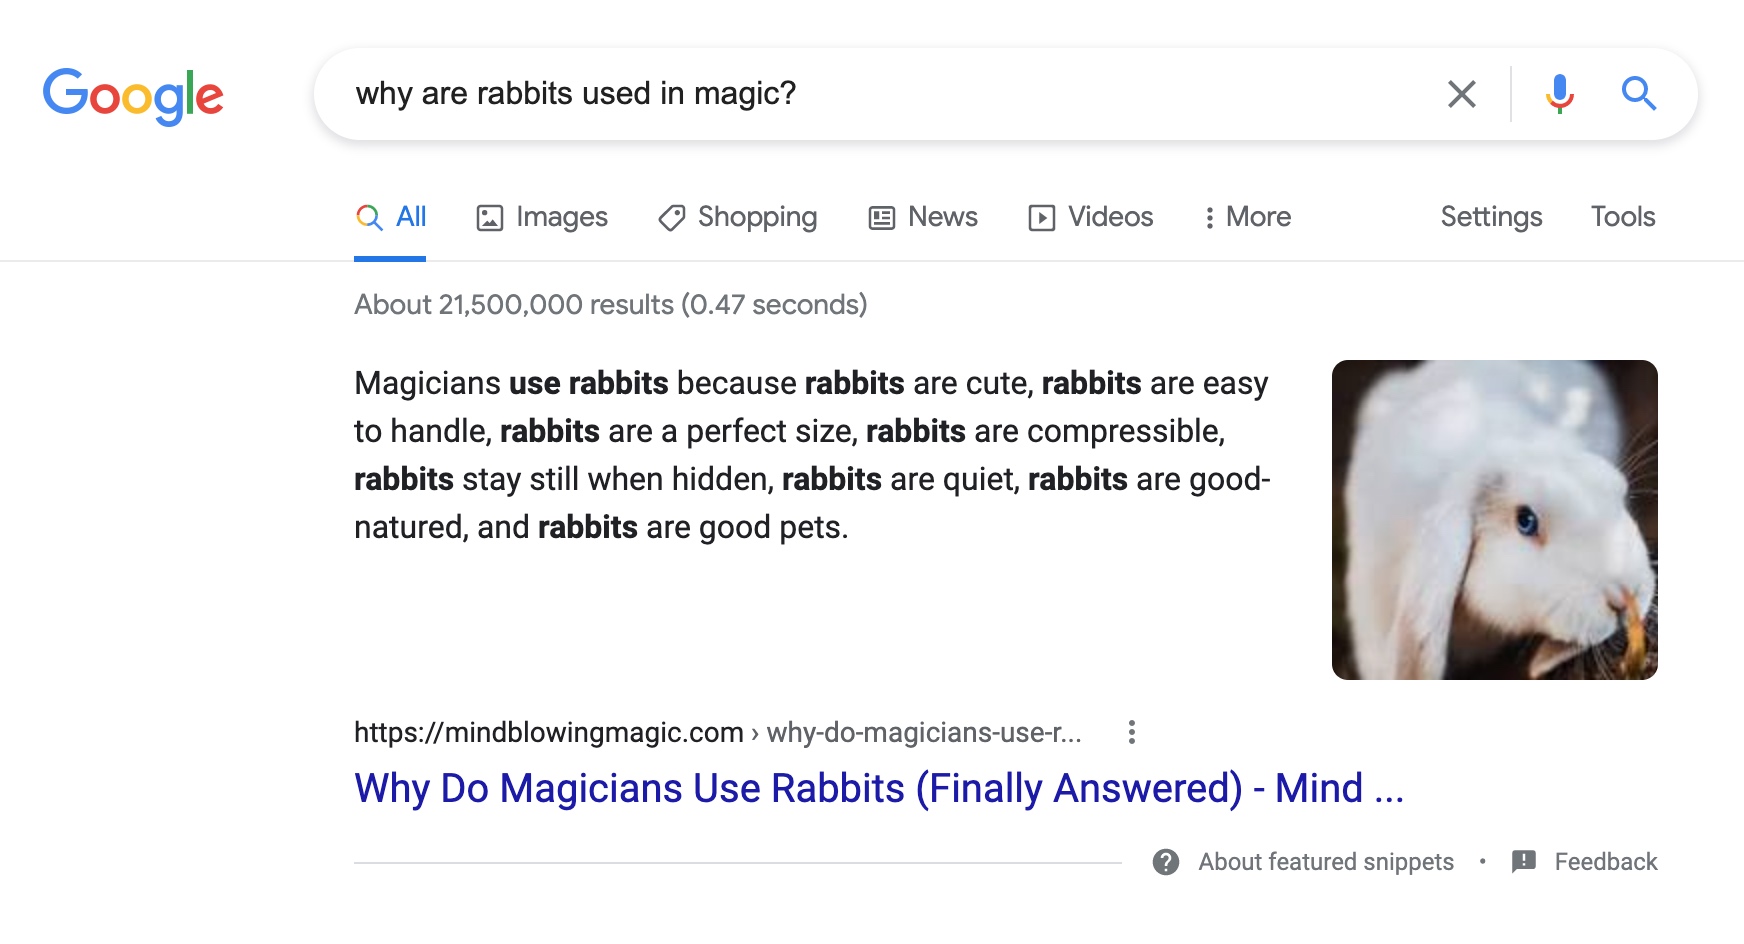 A featured snippet in Google search results